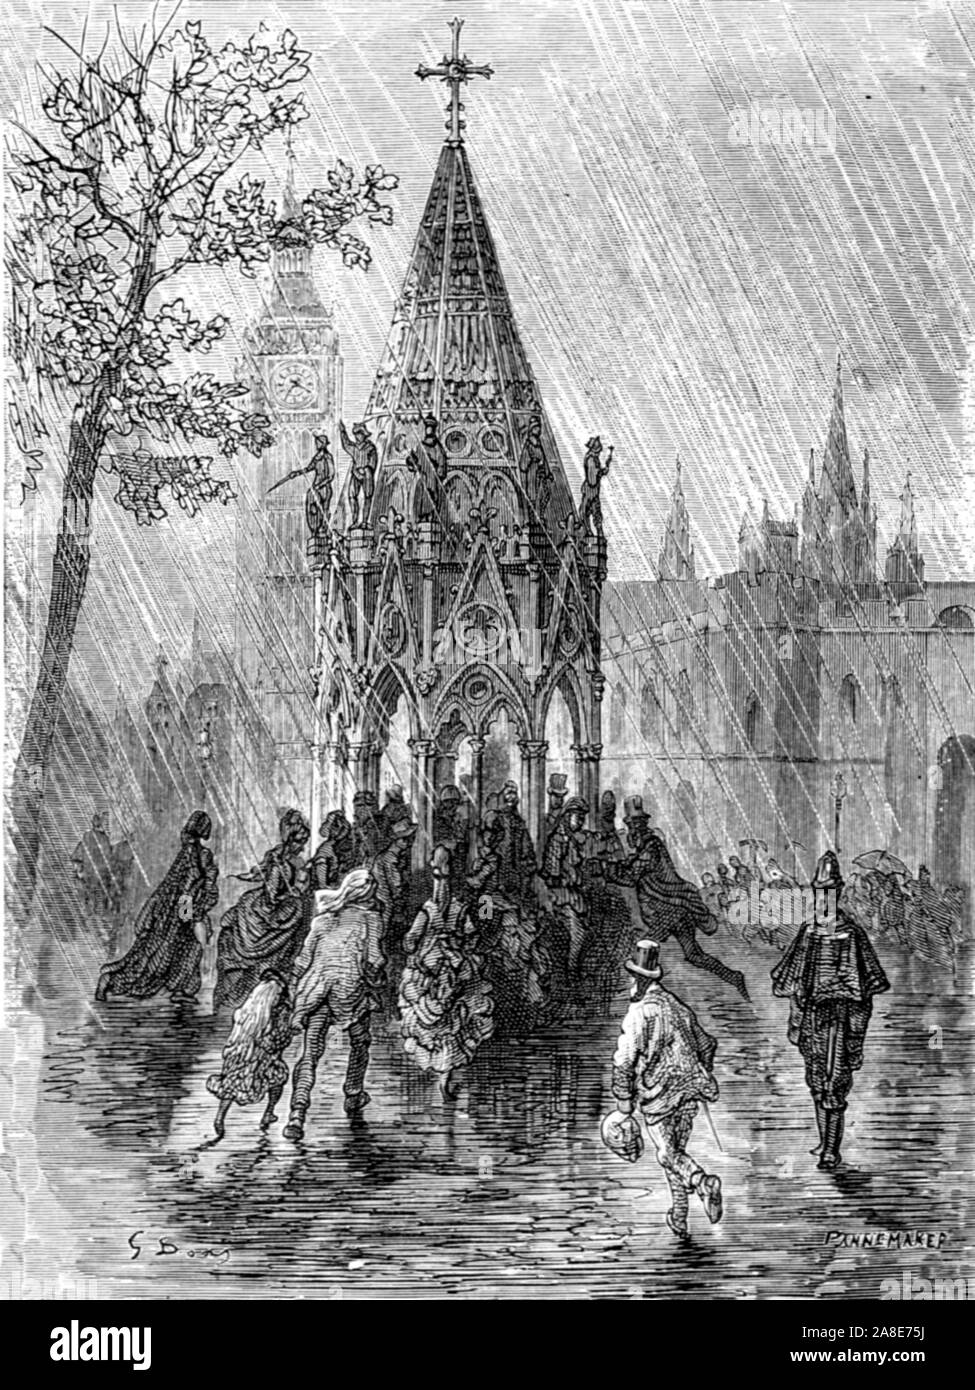 'The Fountain-Broad Sanctuary', 1872. Men women and children run for shelter under  Buxton Memorial Fountain in  memory of Sir Thomas Fowell Buxton, a philanthropist and anti-slavery campaigner. From, &quot;LONDON. A Pilgrimage&quot; by Gustave Dore and Blanchard Jerrold. [Grant and Co., 72-78, Turnmill Street, E.C., 1872]. Stock Photo